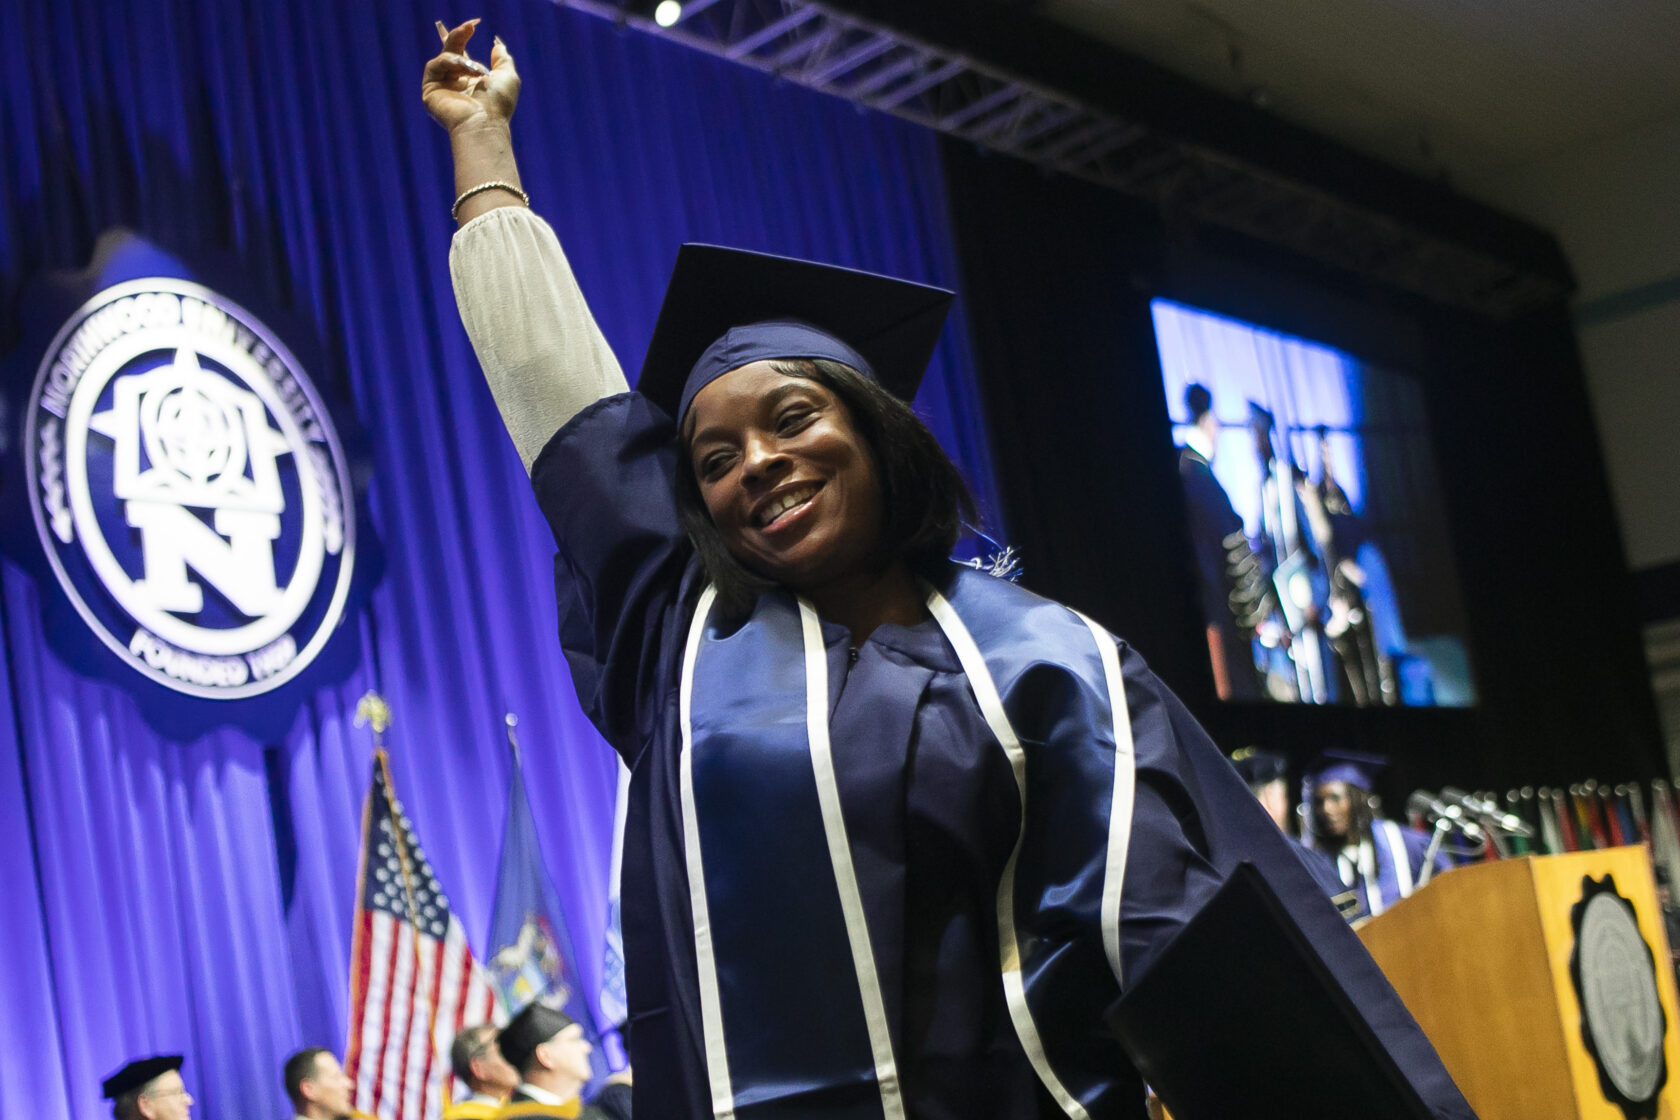 Northwood graduate holding a fist in the air, smiling, while walking off stage with her diploma.